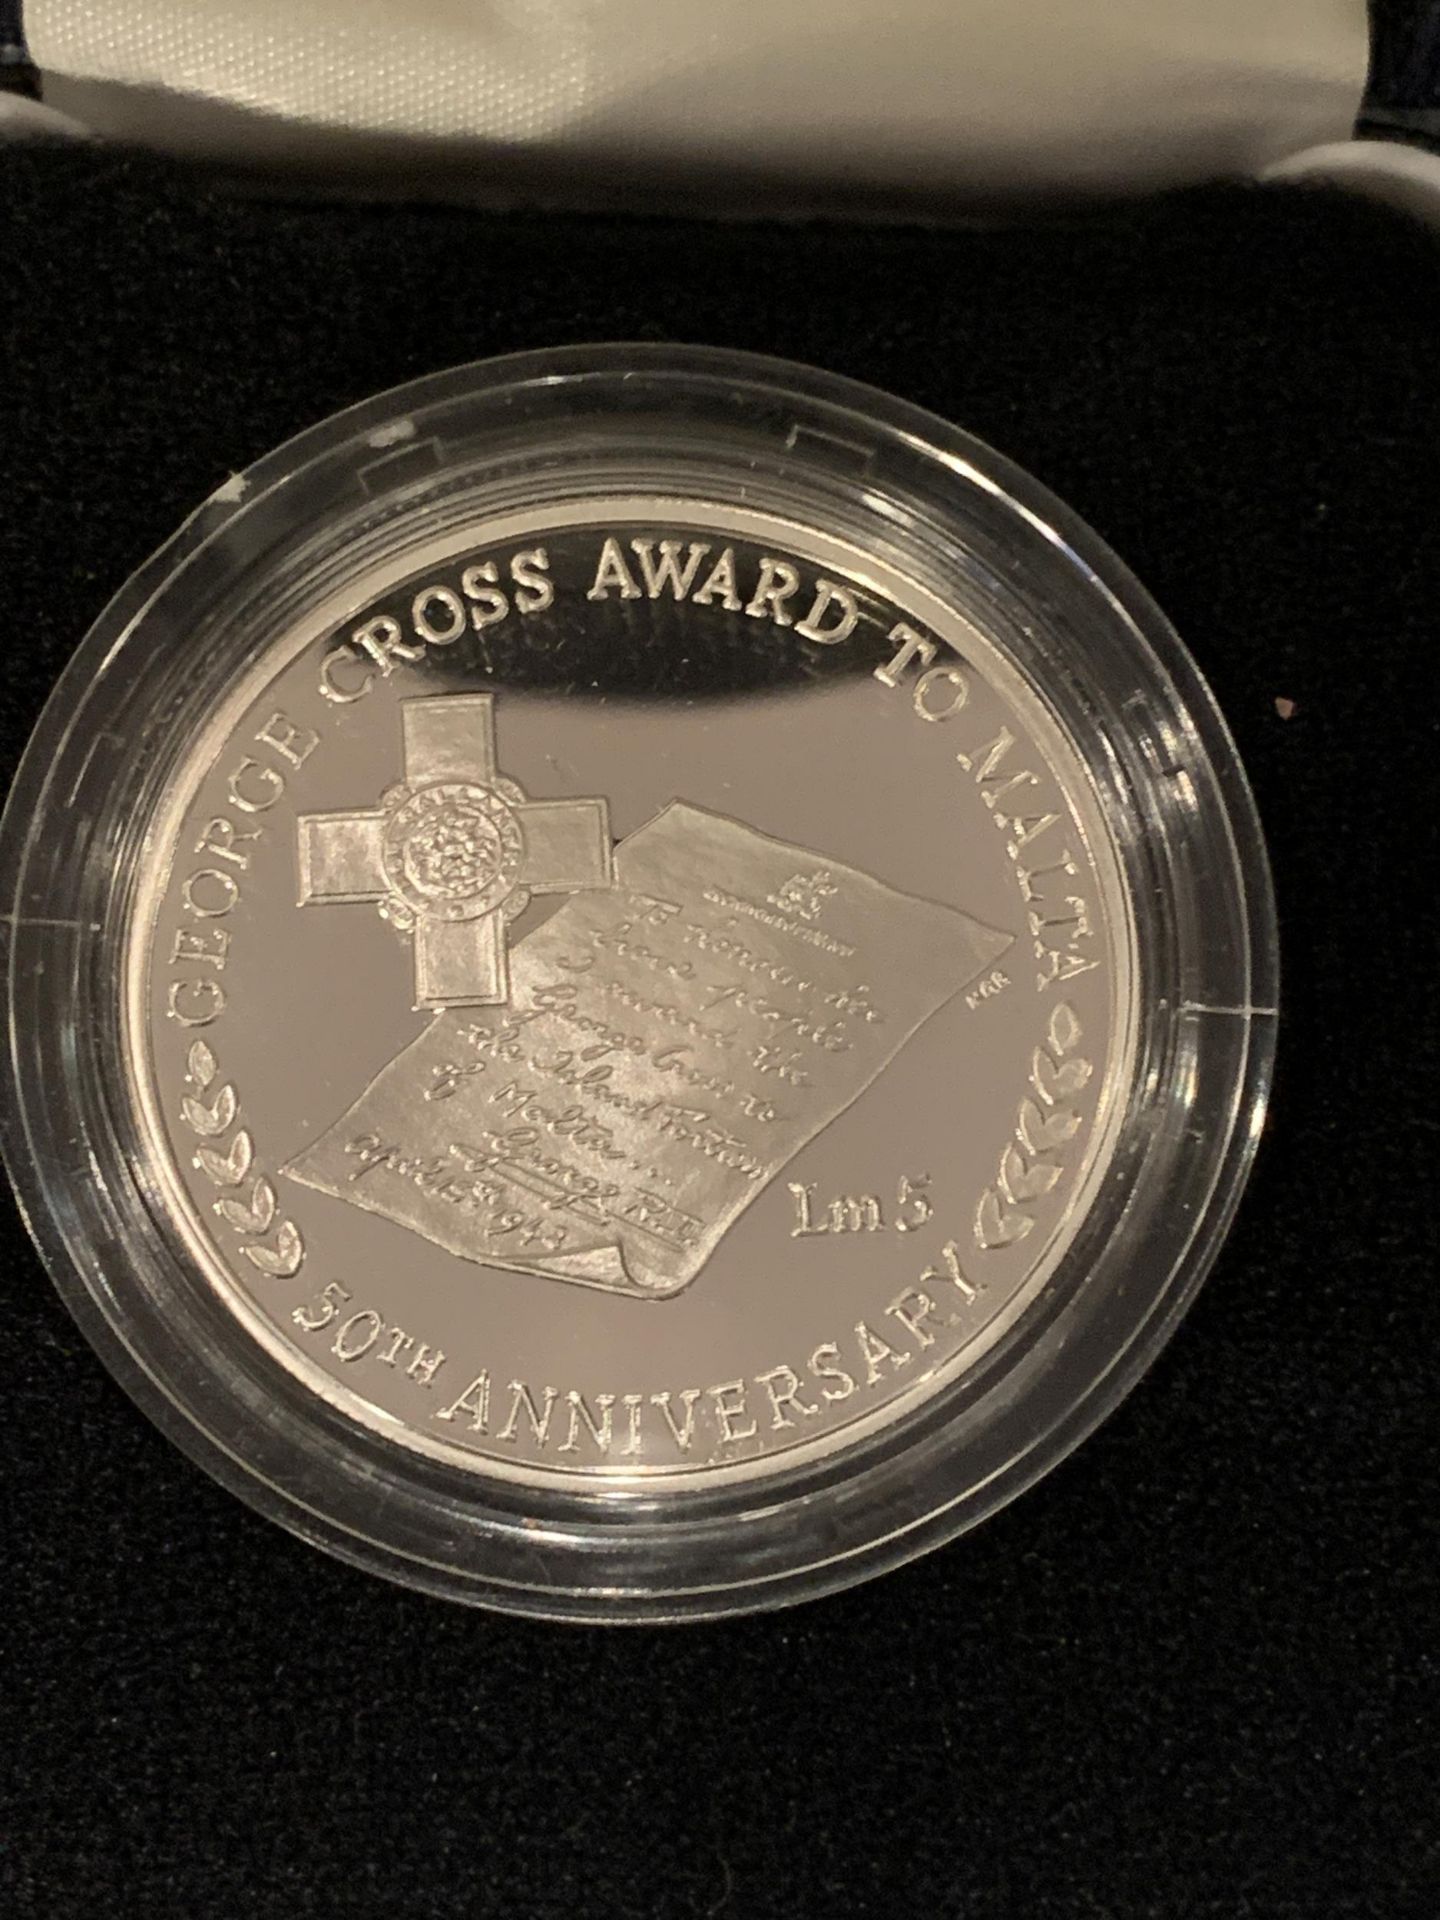 MALTA 1992 , GEORGE CROSS ANNIVERSARY LM5 , SILVER PROOF COIN . CASED WITH COA - Image 2 of 3